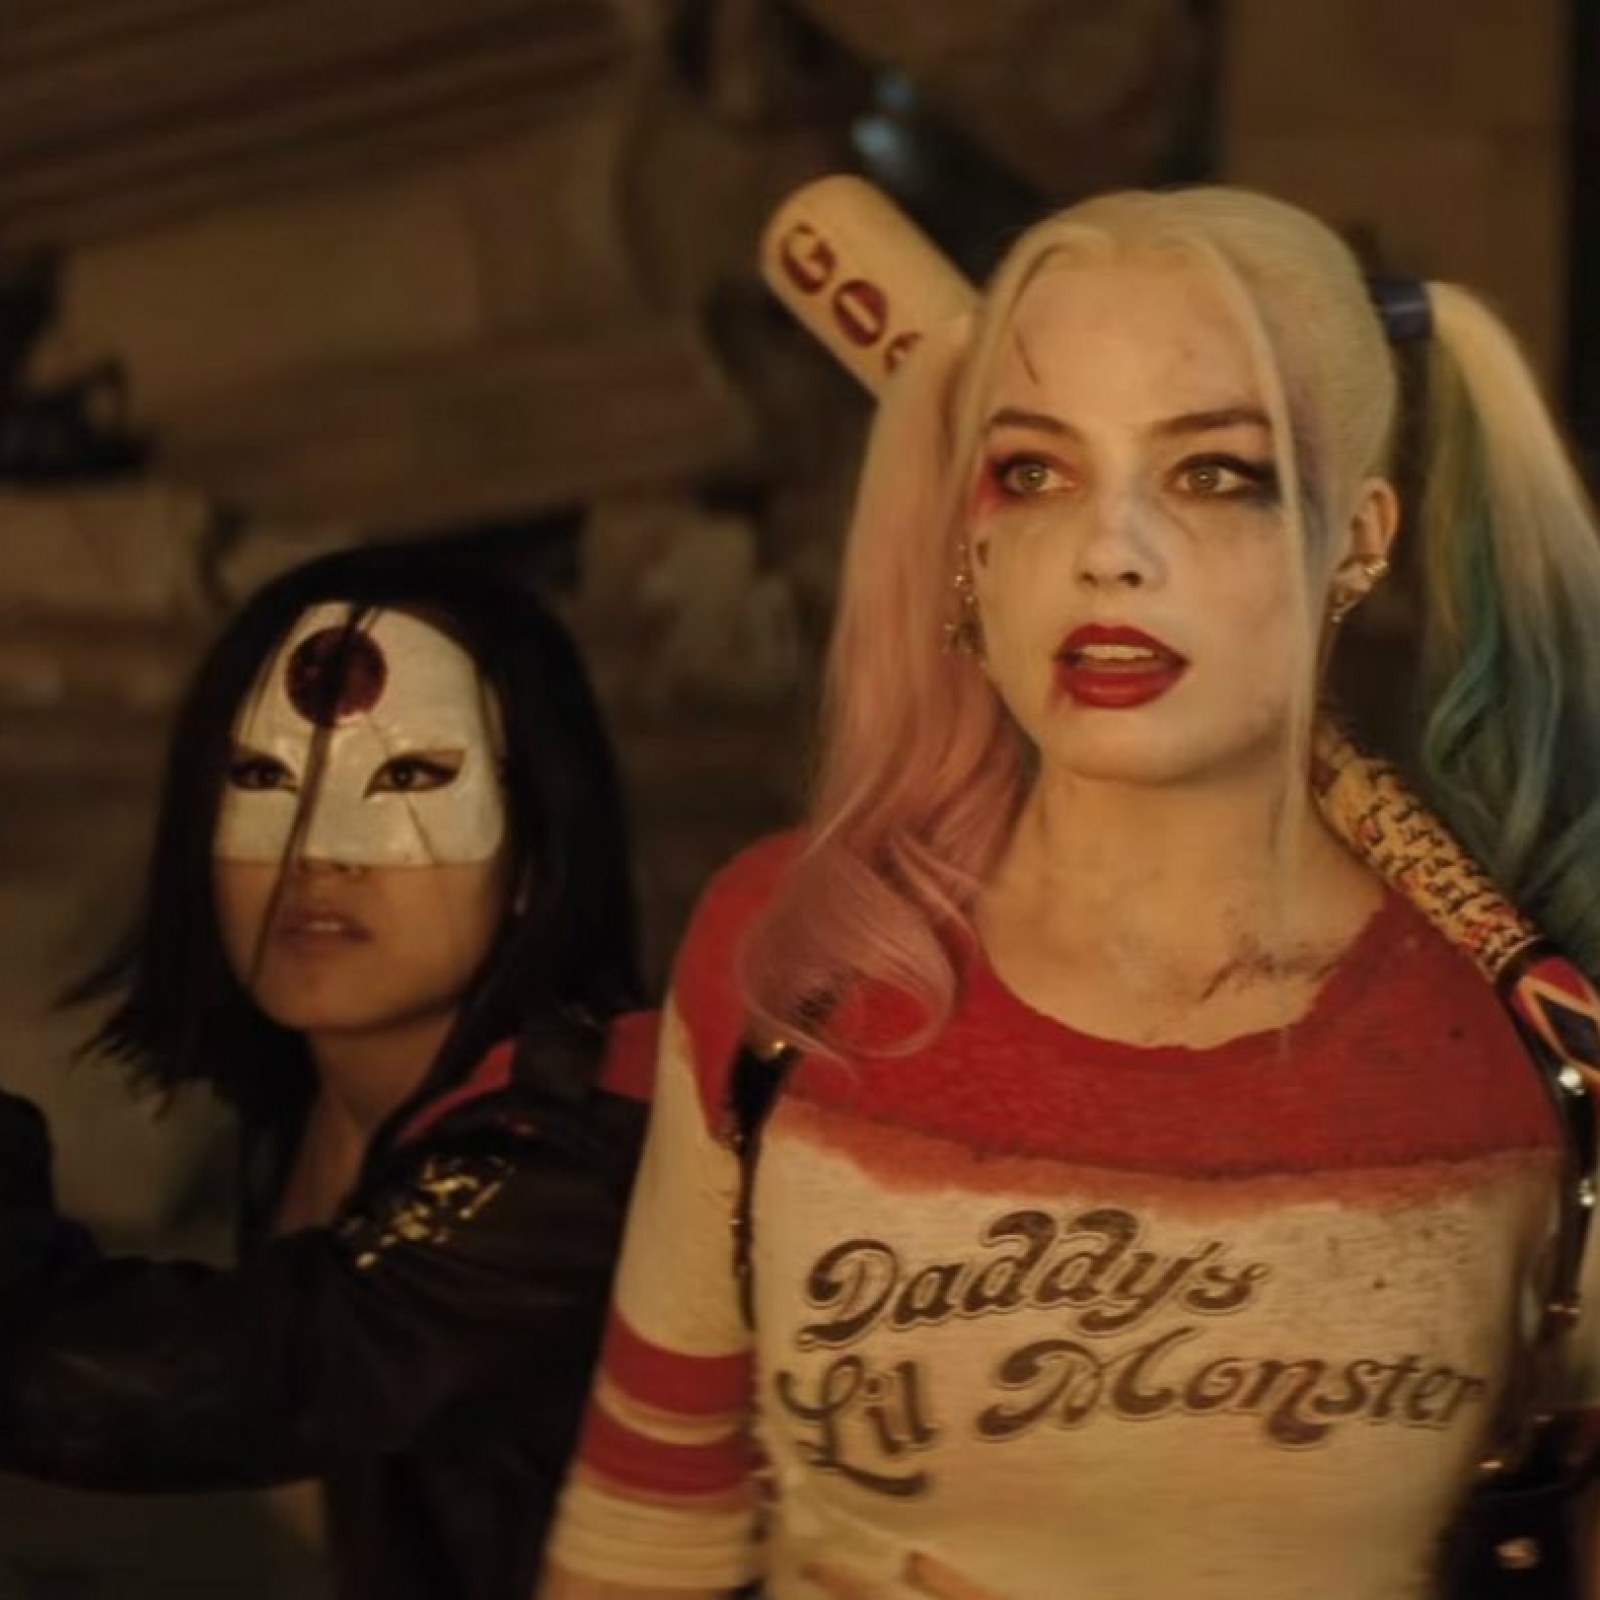 The Suicide Squad cast, trailer, release date, Harley Quinn and